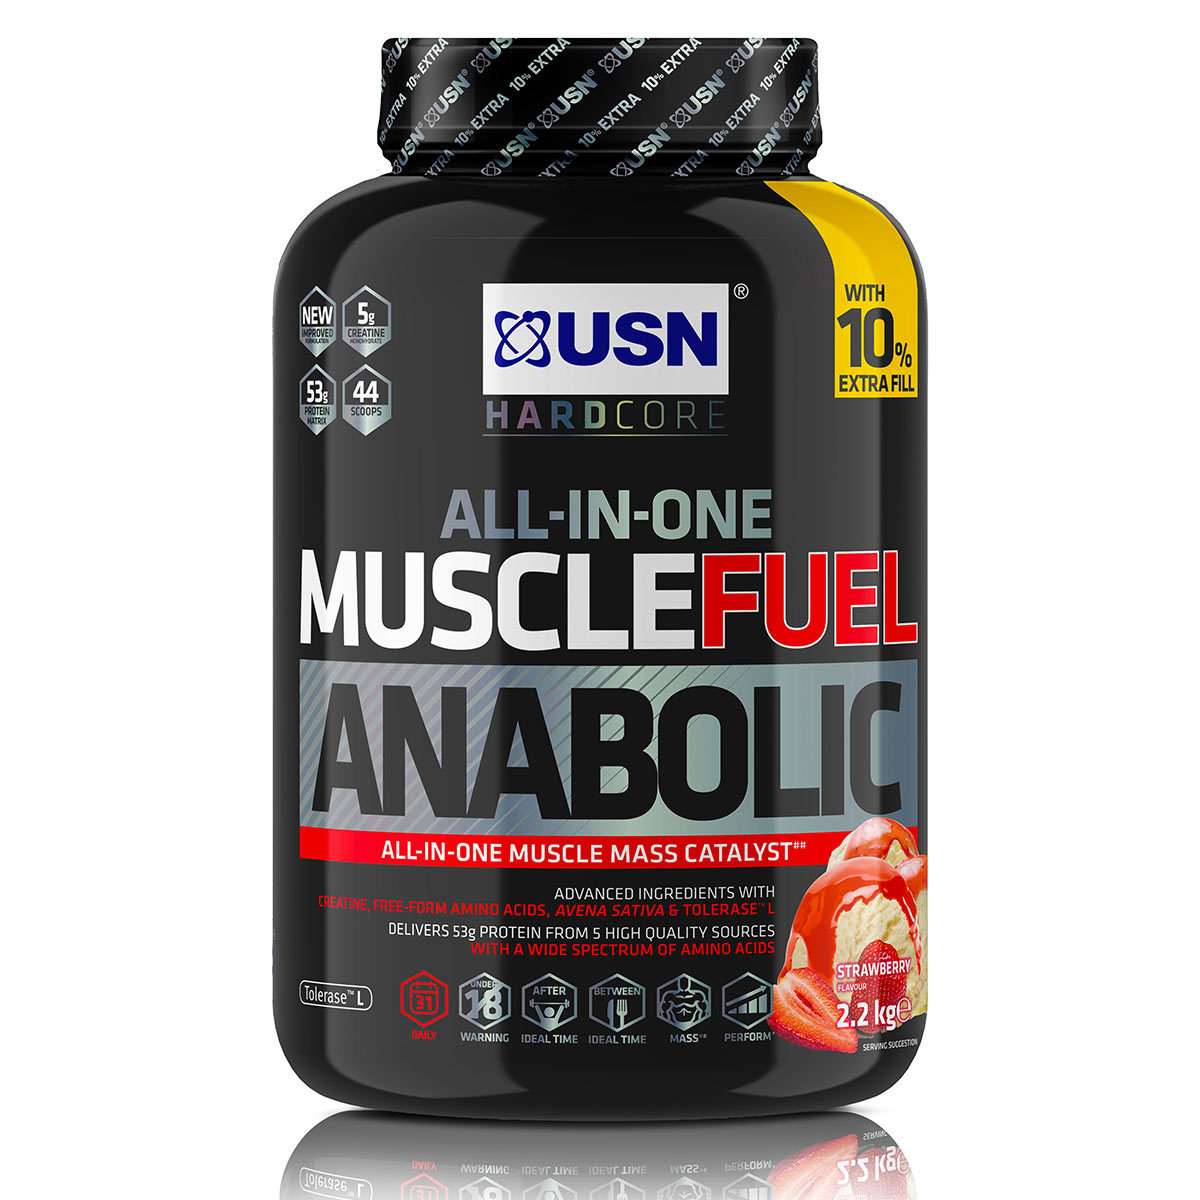 Front facing image of USN Muscle Fuel Anabolic tub on white background